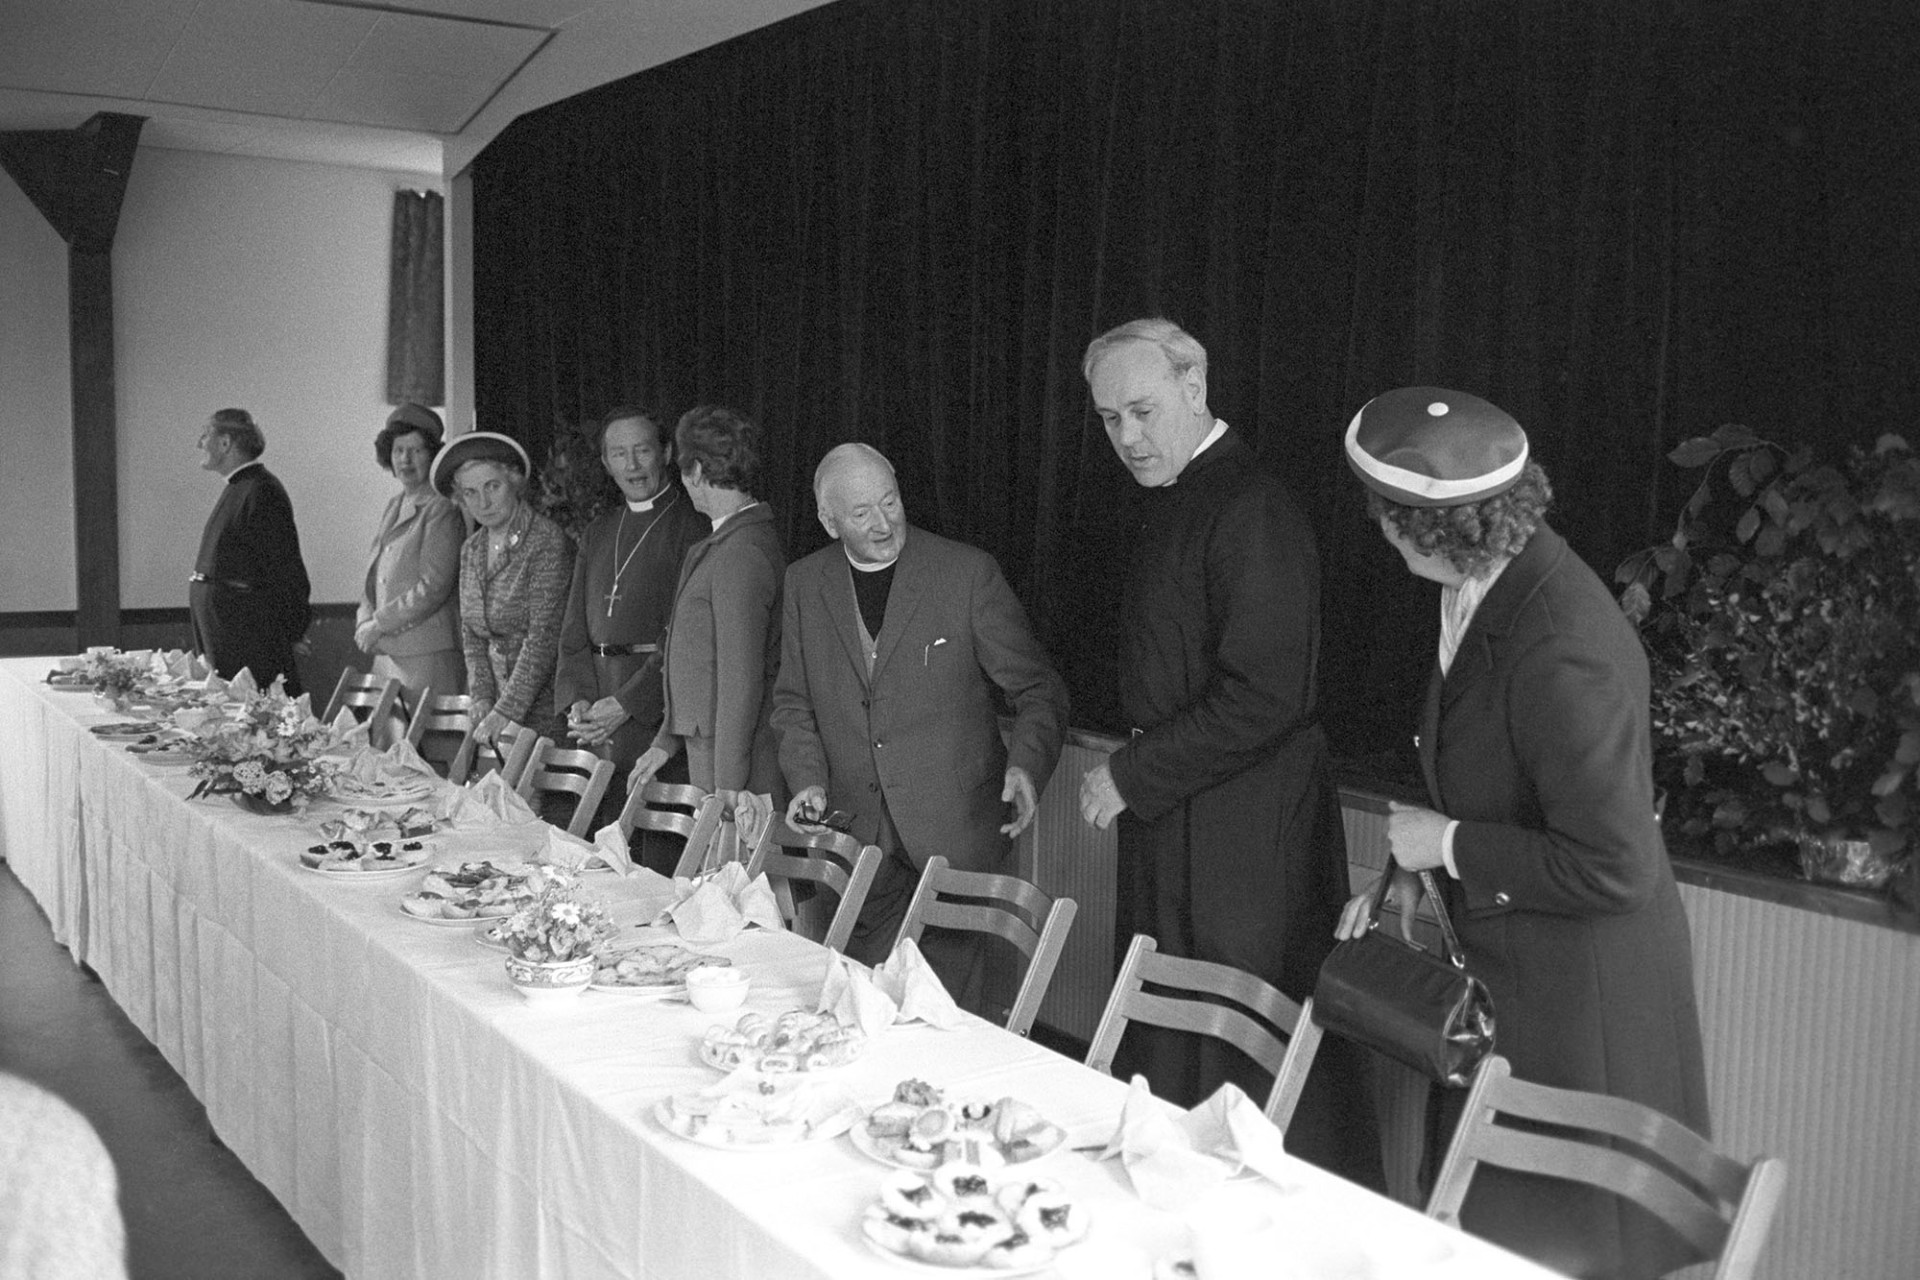 Mothers Union after church tea in the village hall vicars and wives.
[Reverend Moorse, in the centre, and other vicars and their wives waiting to be seated at a table spread with afternoon tea in Dolton Village Hall after the Mother's Union Parade. The table is decorated with small flower arrangements.]